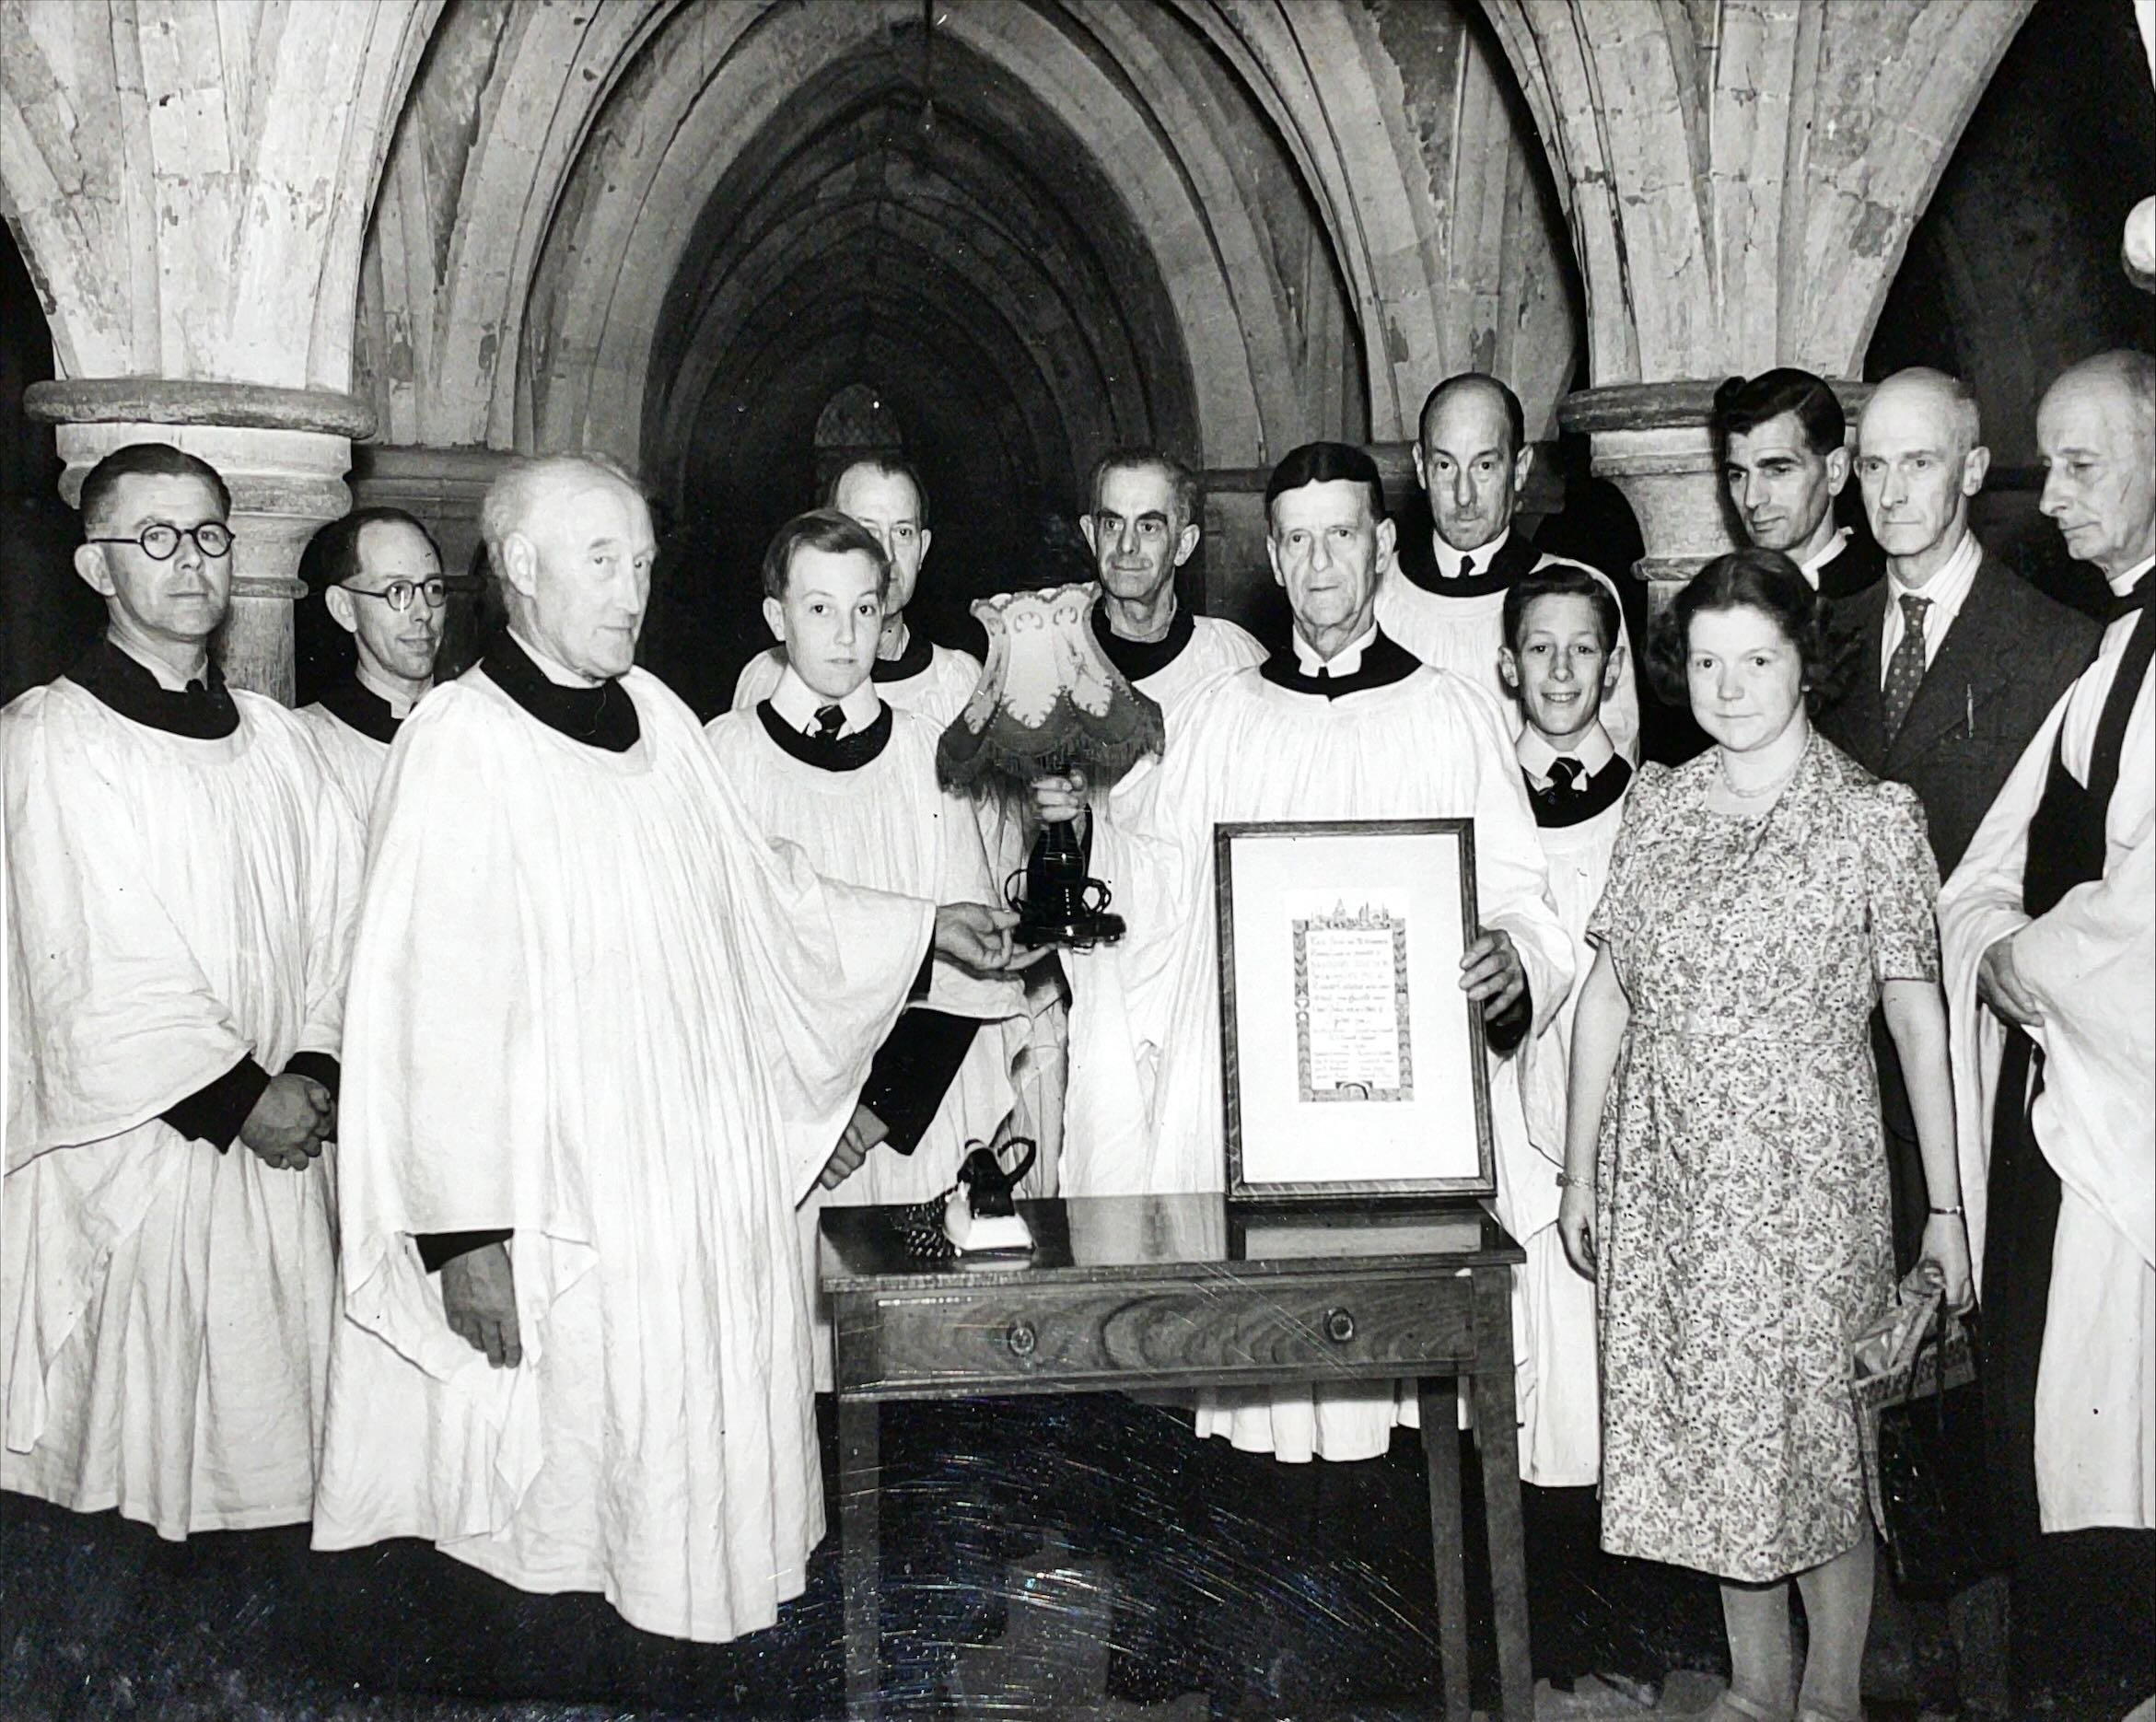 Mr H. C. Wilkins presenting Mr H. Simpson with gifts on retirement after thirty-two years as Lay Clerk, July 1952